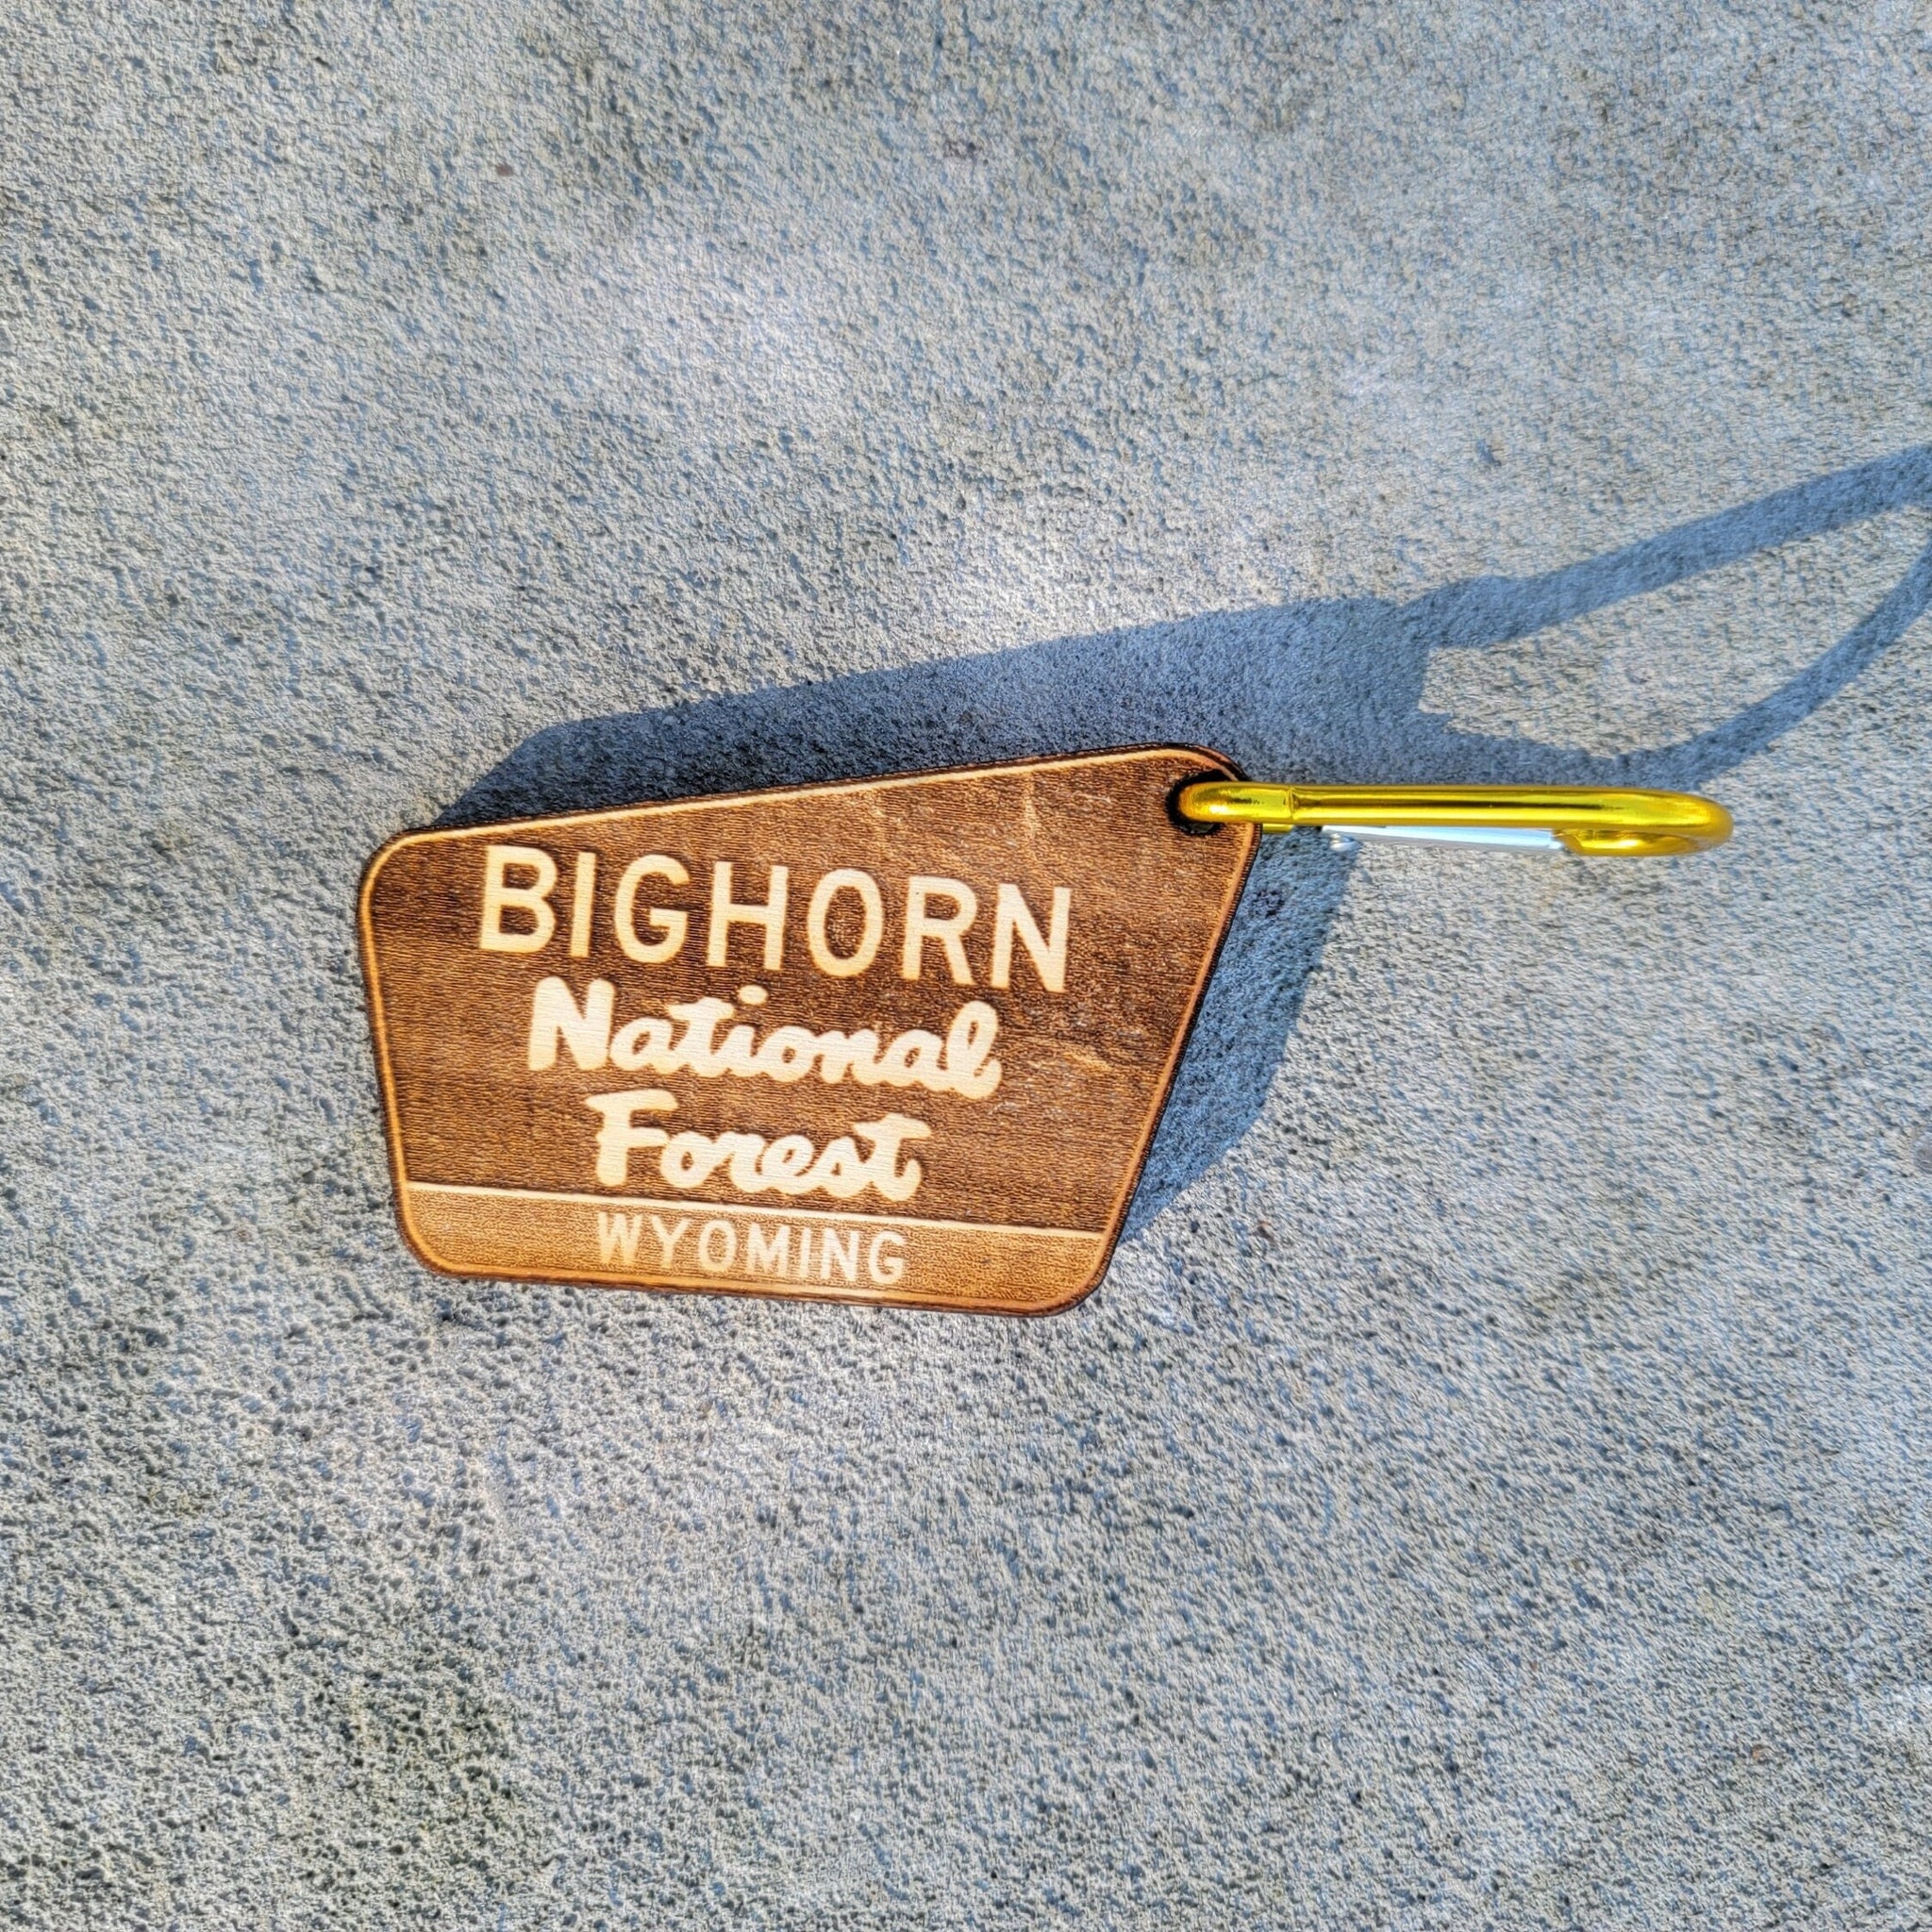 Bighorn National Forest Wood Keychain Ornament Wyoming Park With Carabiner 3.25" Wide